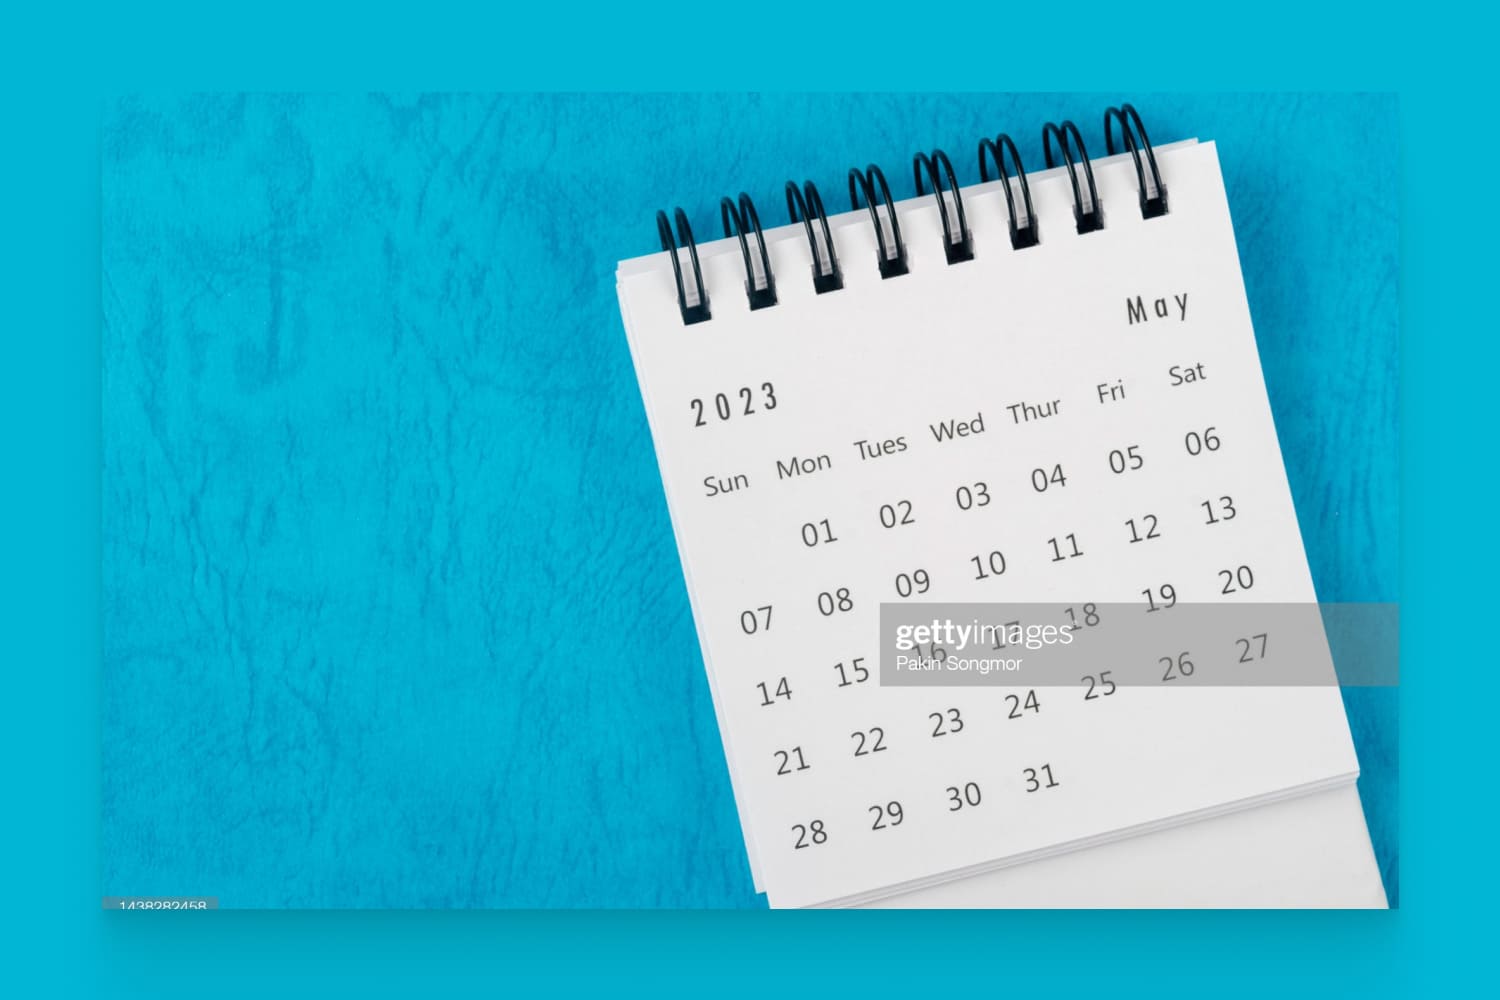 May is the month for the organizer to plan and deadline with a blue paper background.